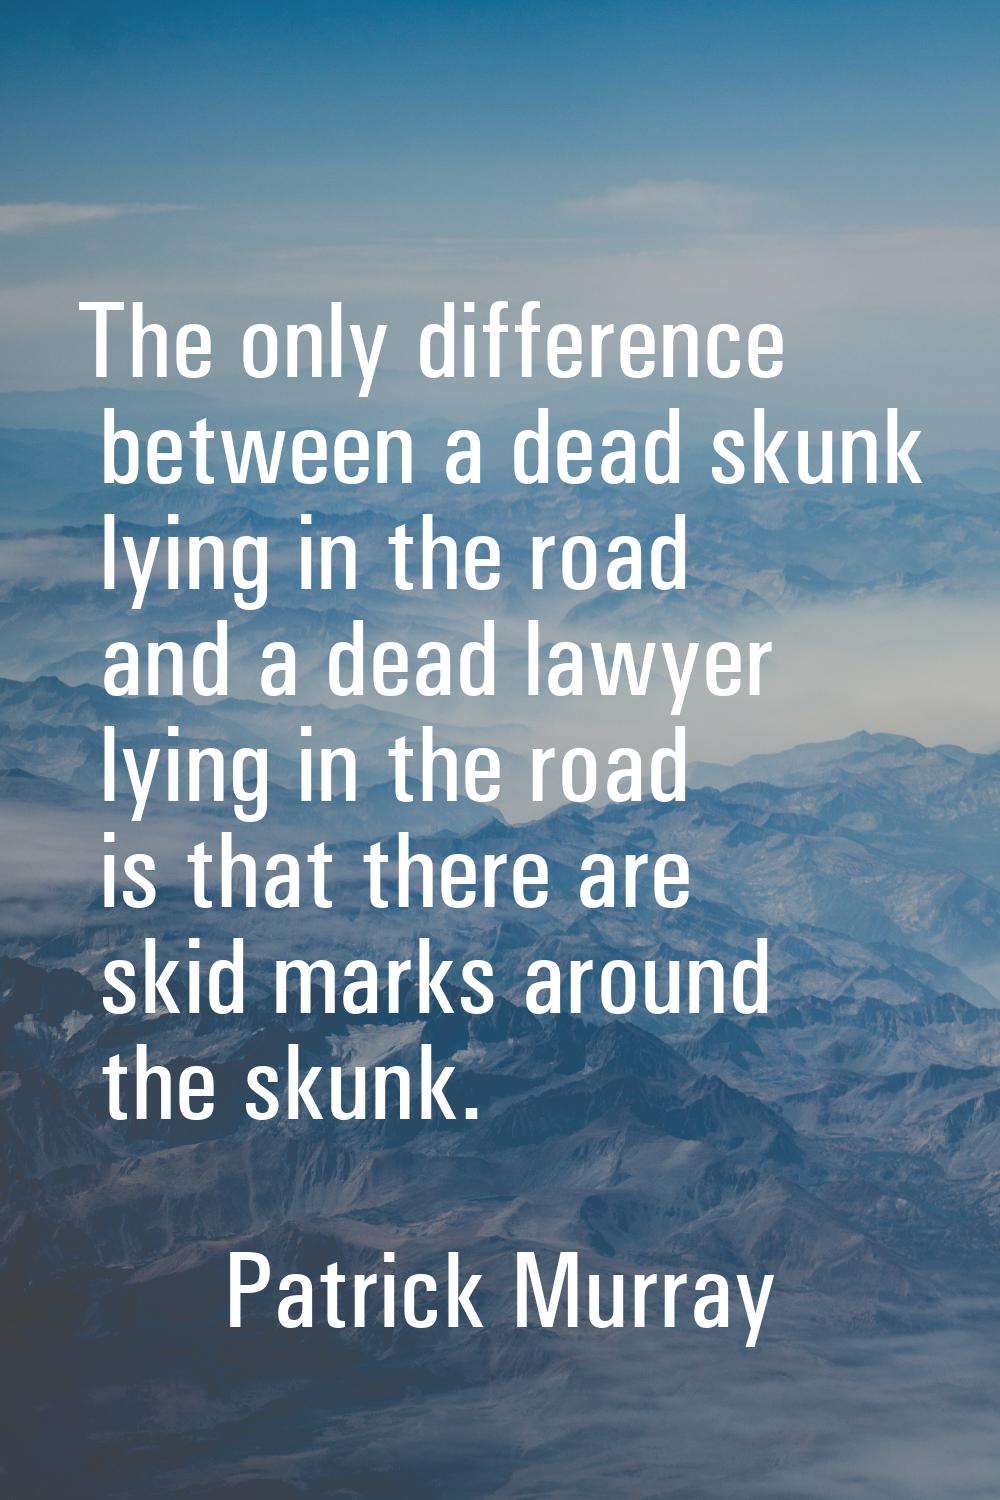 The only difference between a dead skunk lying in the road and a dead lawyer lying in the road is t